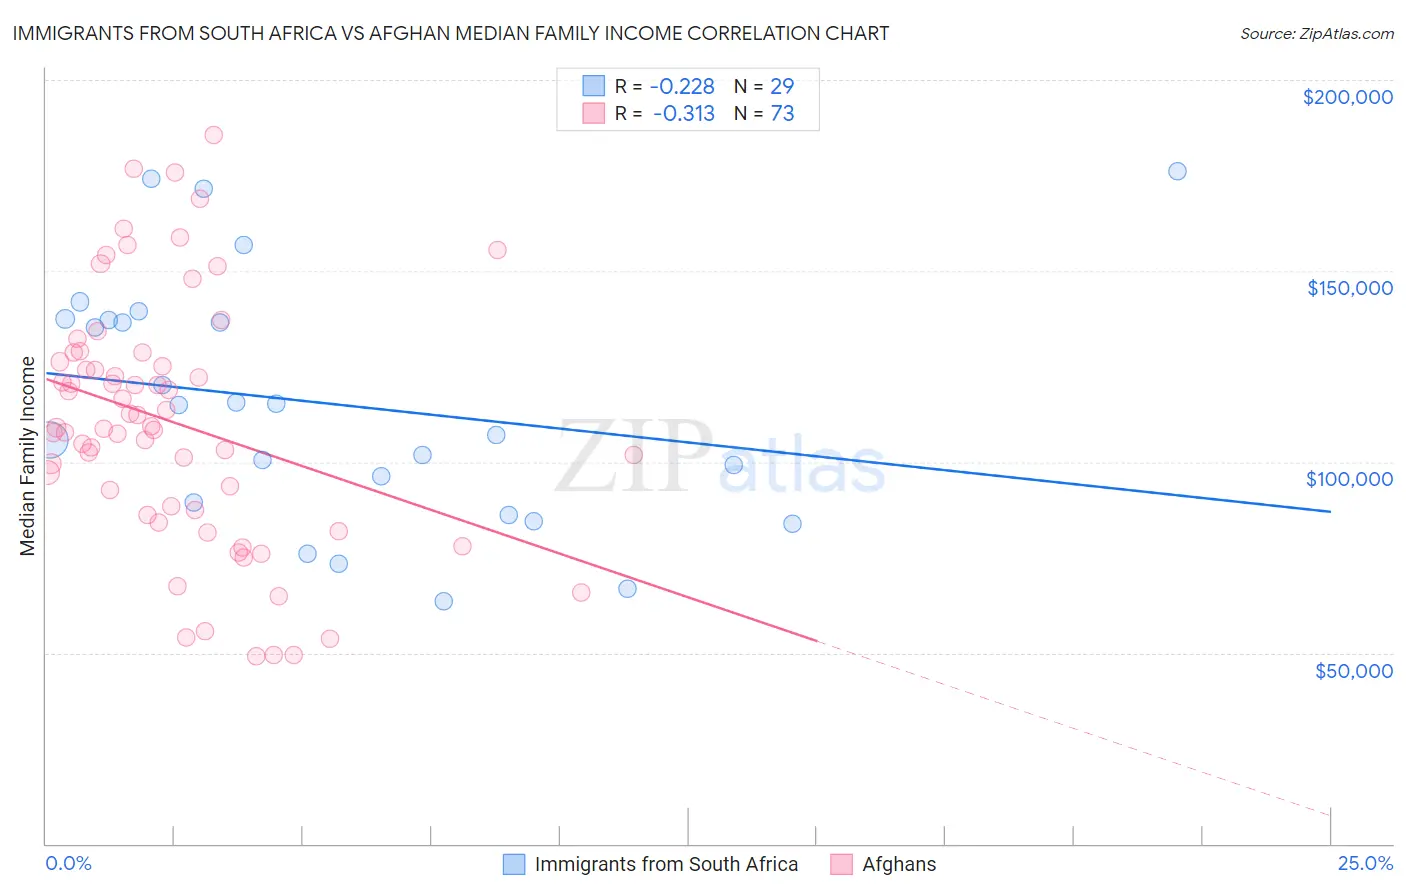 Immigrants from South Africa vs Afghan Median Family Income